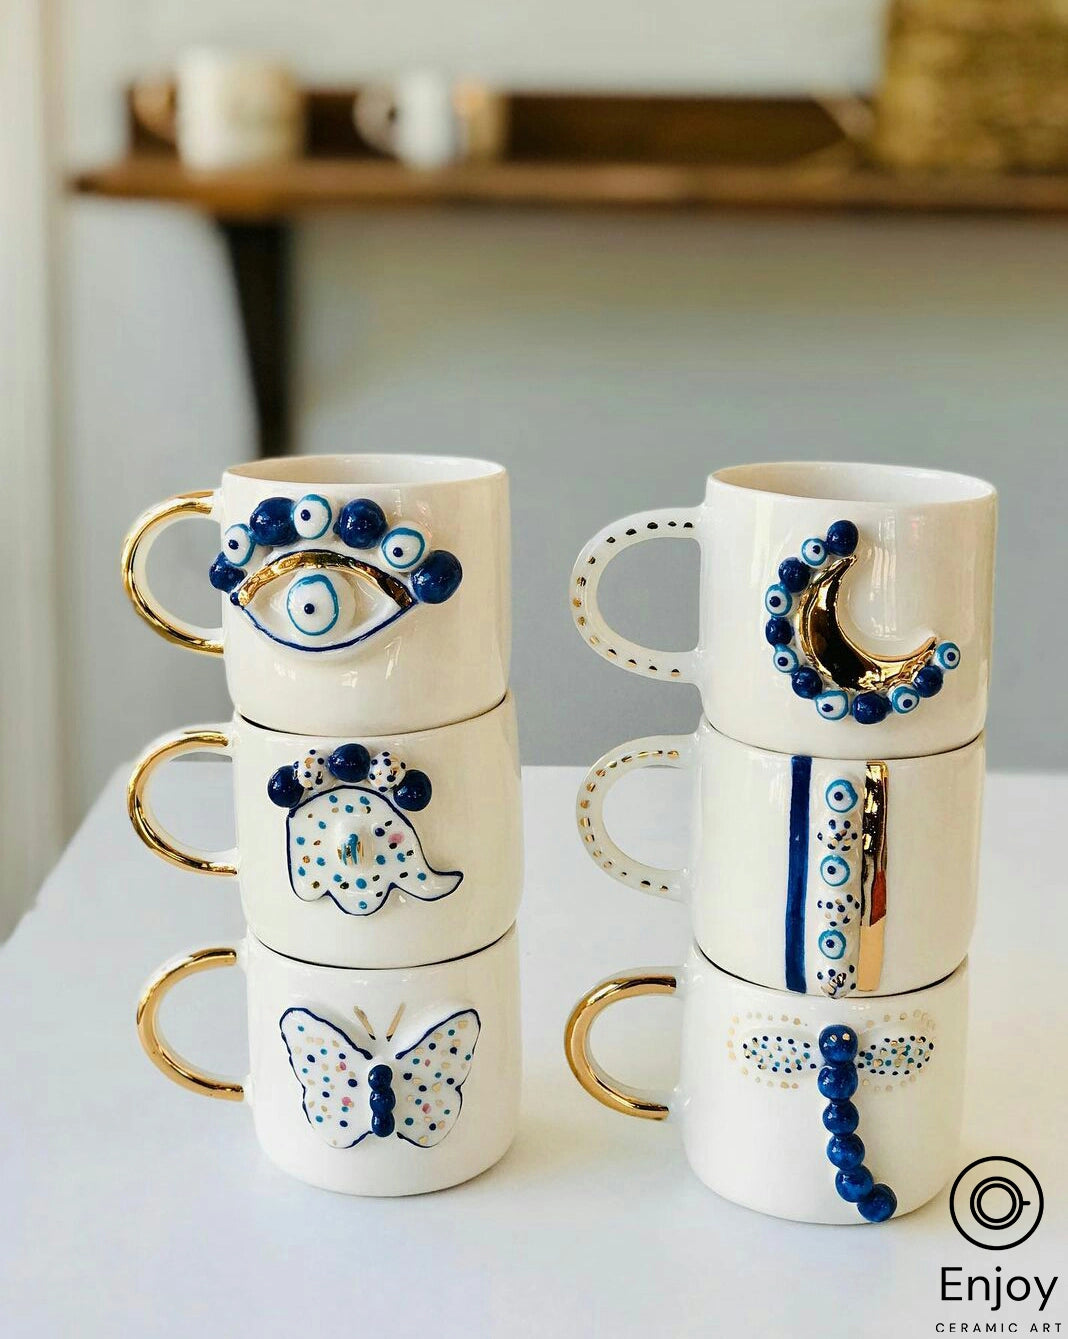 Coffee mugs with blue moon and evil eye design, gold handle, on saucer against a soft background, reflecting artisanal ceramic craft.